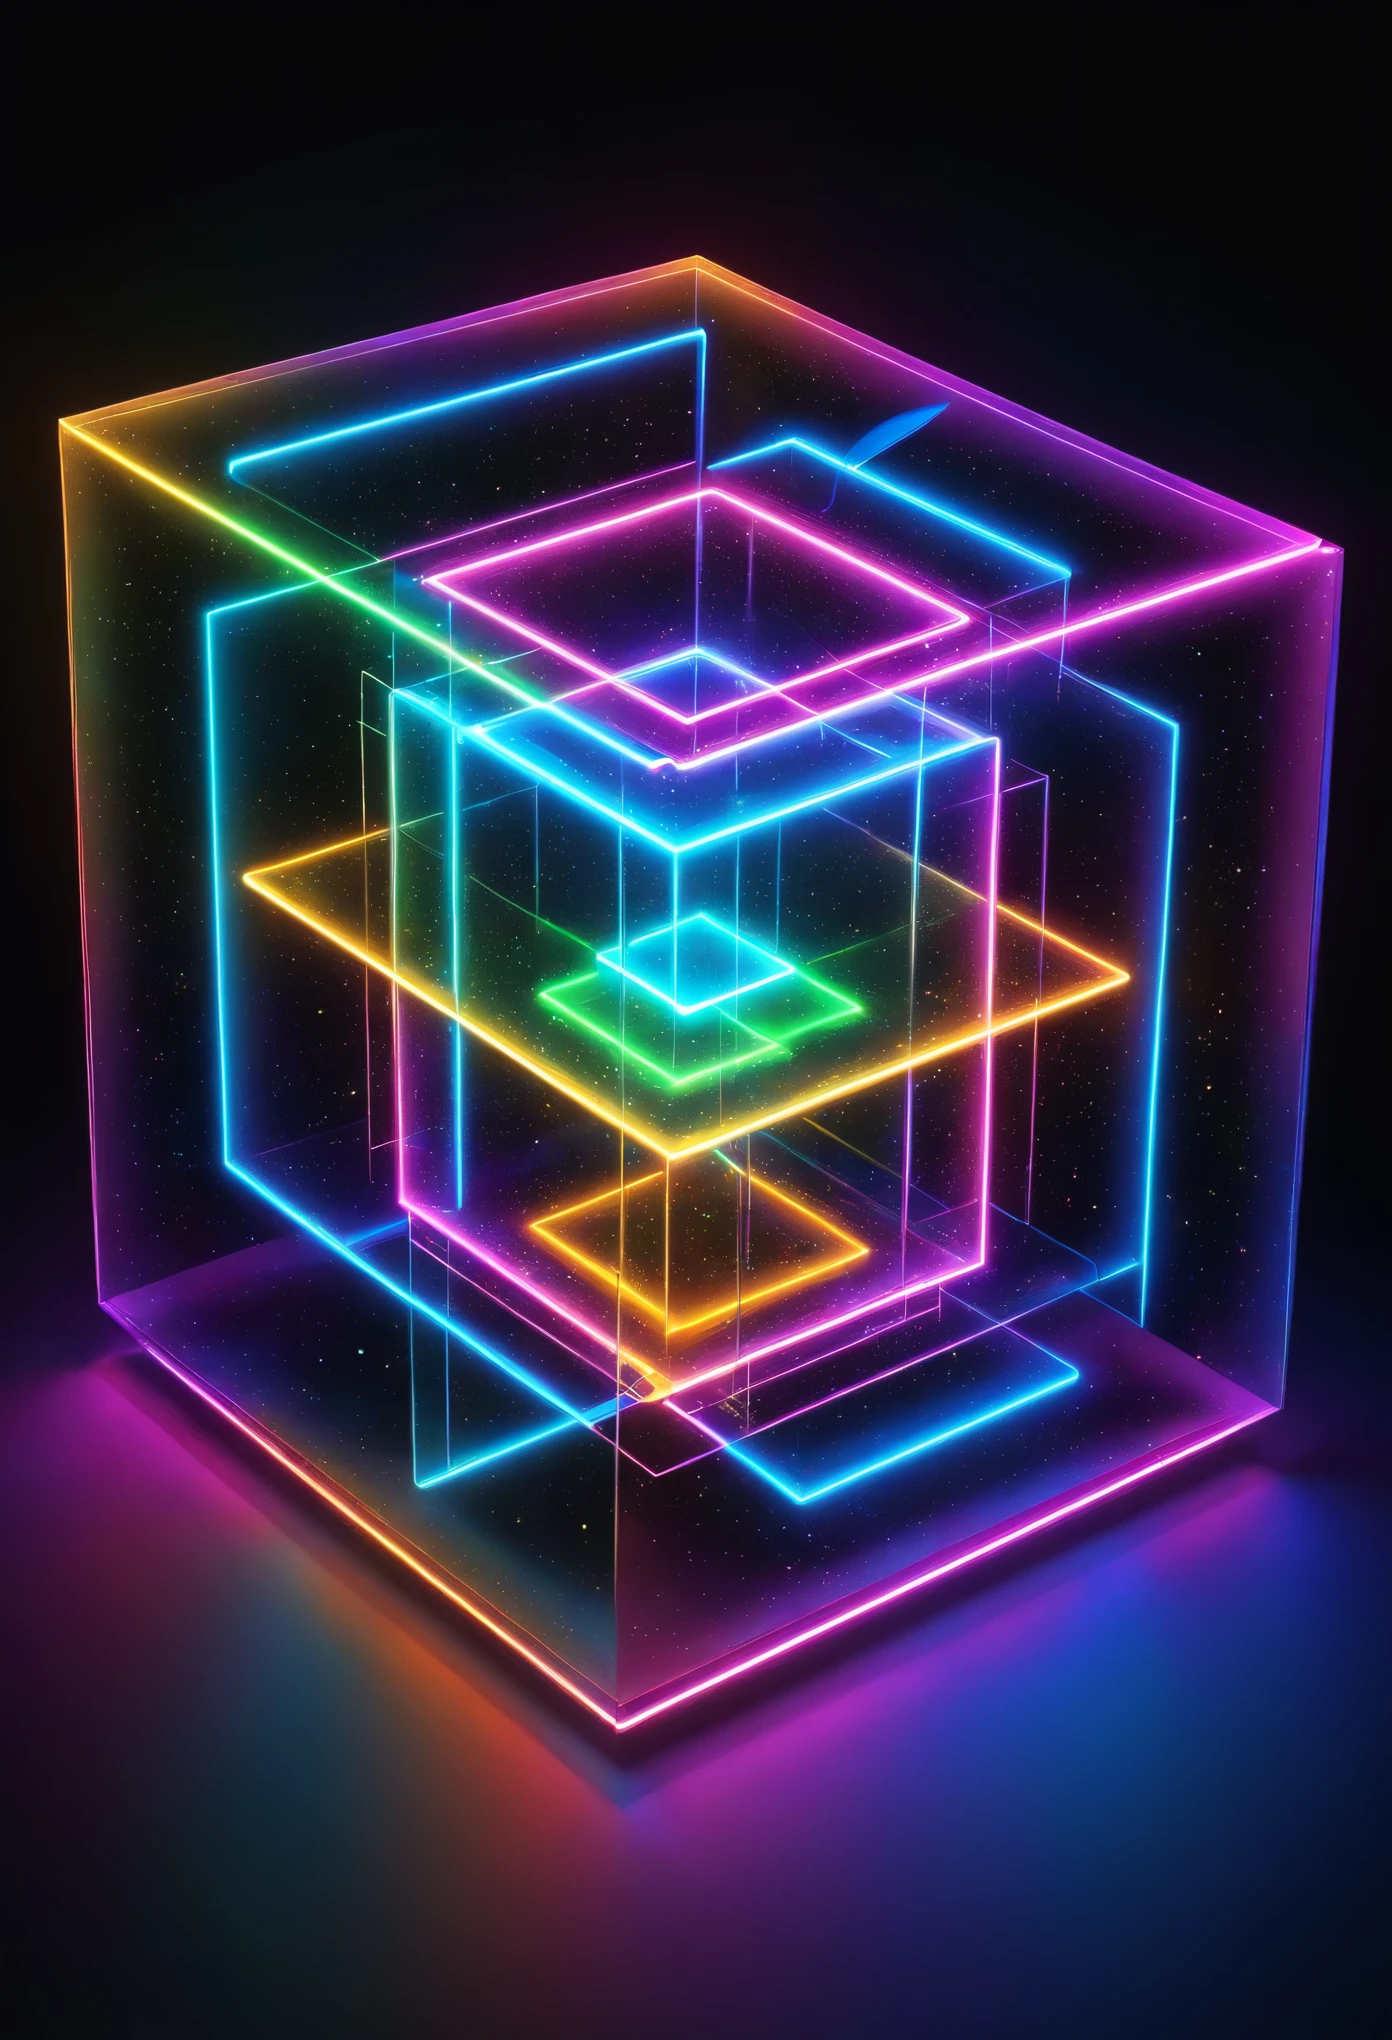 holography, draw in neon colors ((巨大なgeometryオブジェクト)): geometry: ((floating)), transparent, three dimensional, light, SF, Digital art, Digital, scientific, dark background: electronic circuit: draw in neon colors, 3D, masterpiece, Digital空間, energy, beautiful, masterpiece, 8K, light, become familiar with, lively, colorful, nice, beautiful, rich colors, beautiful Light Lines. magic effect, Sparkling, beautiful Light Grains,geometry模様,works of art,Consists of squares and triangles